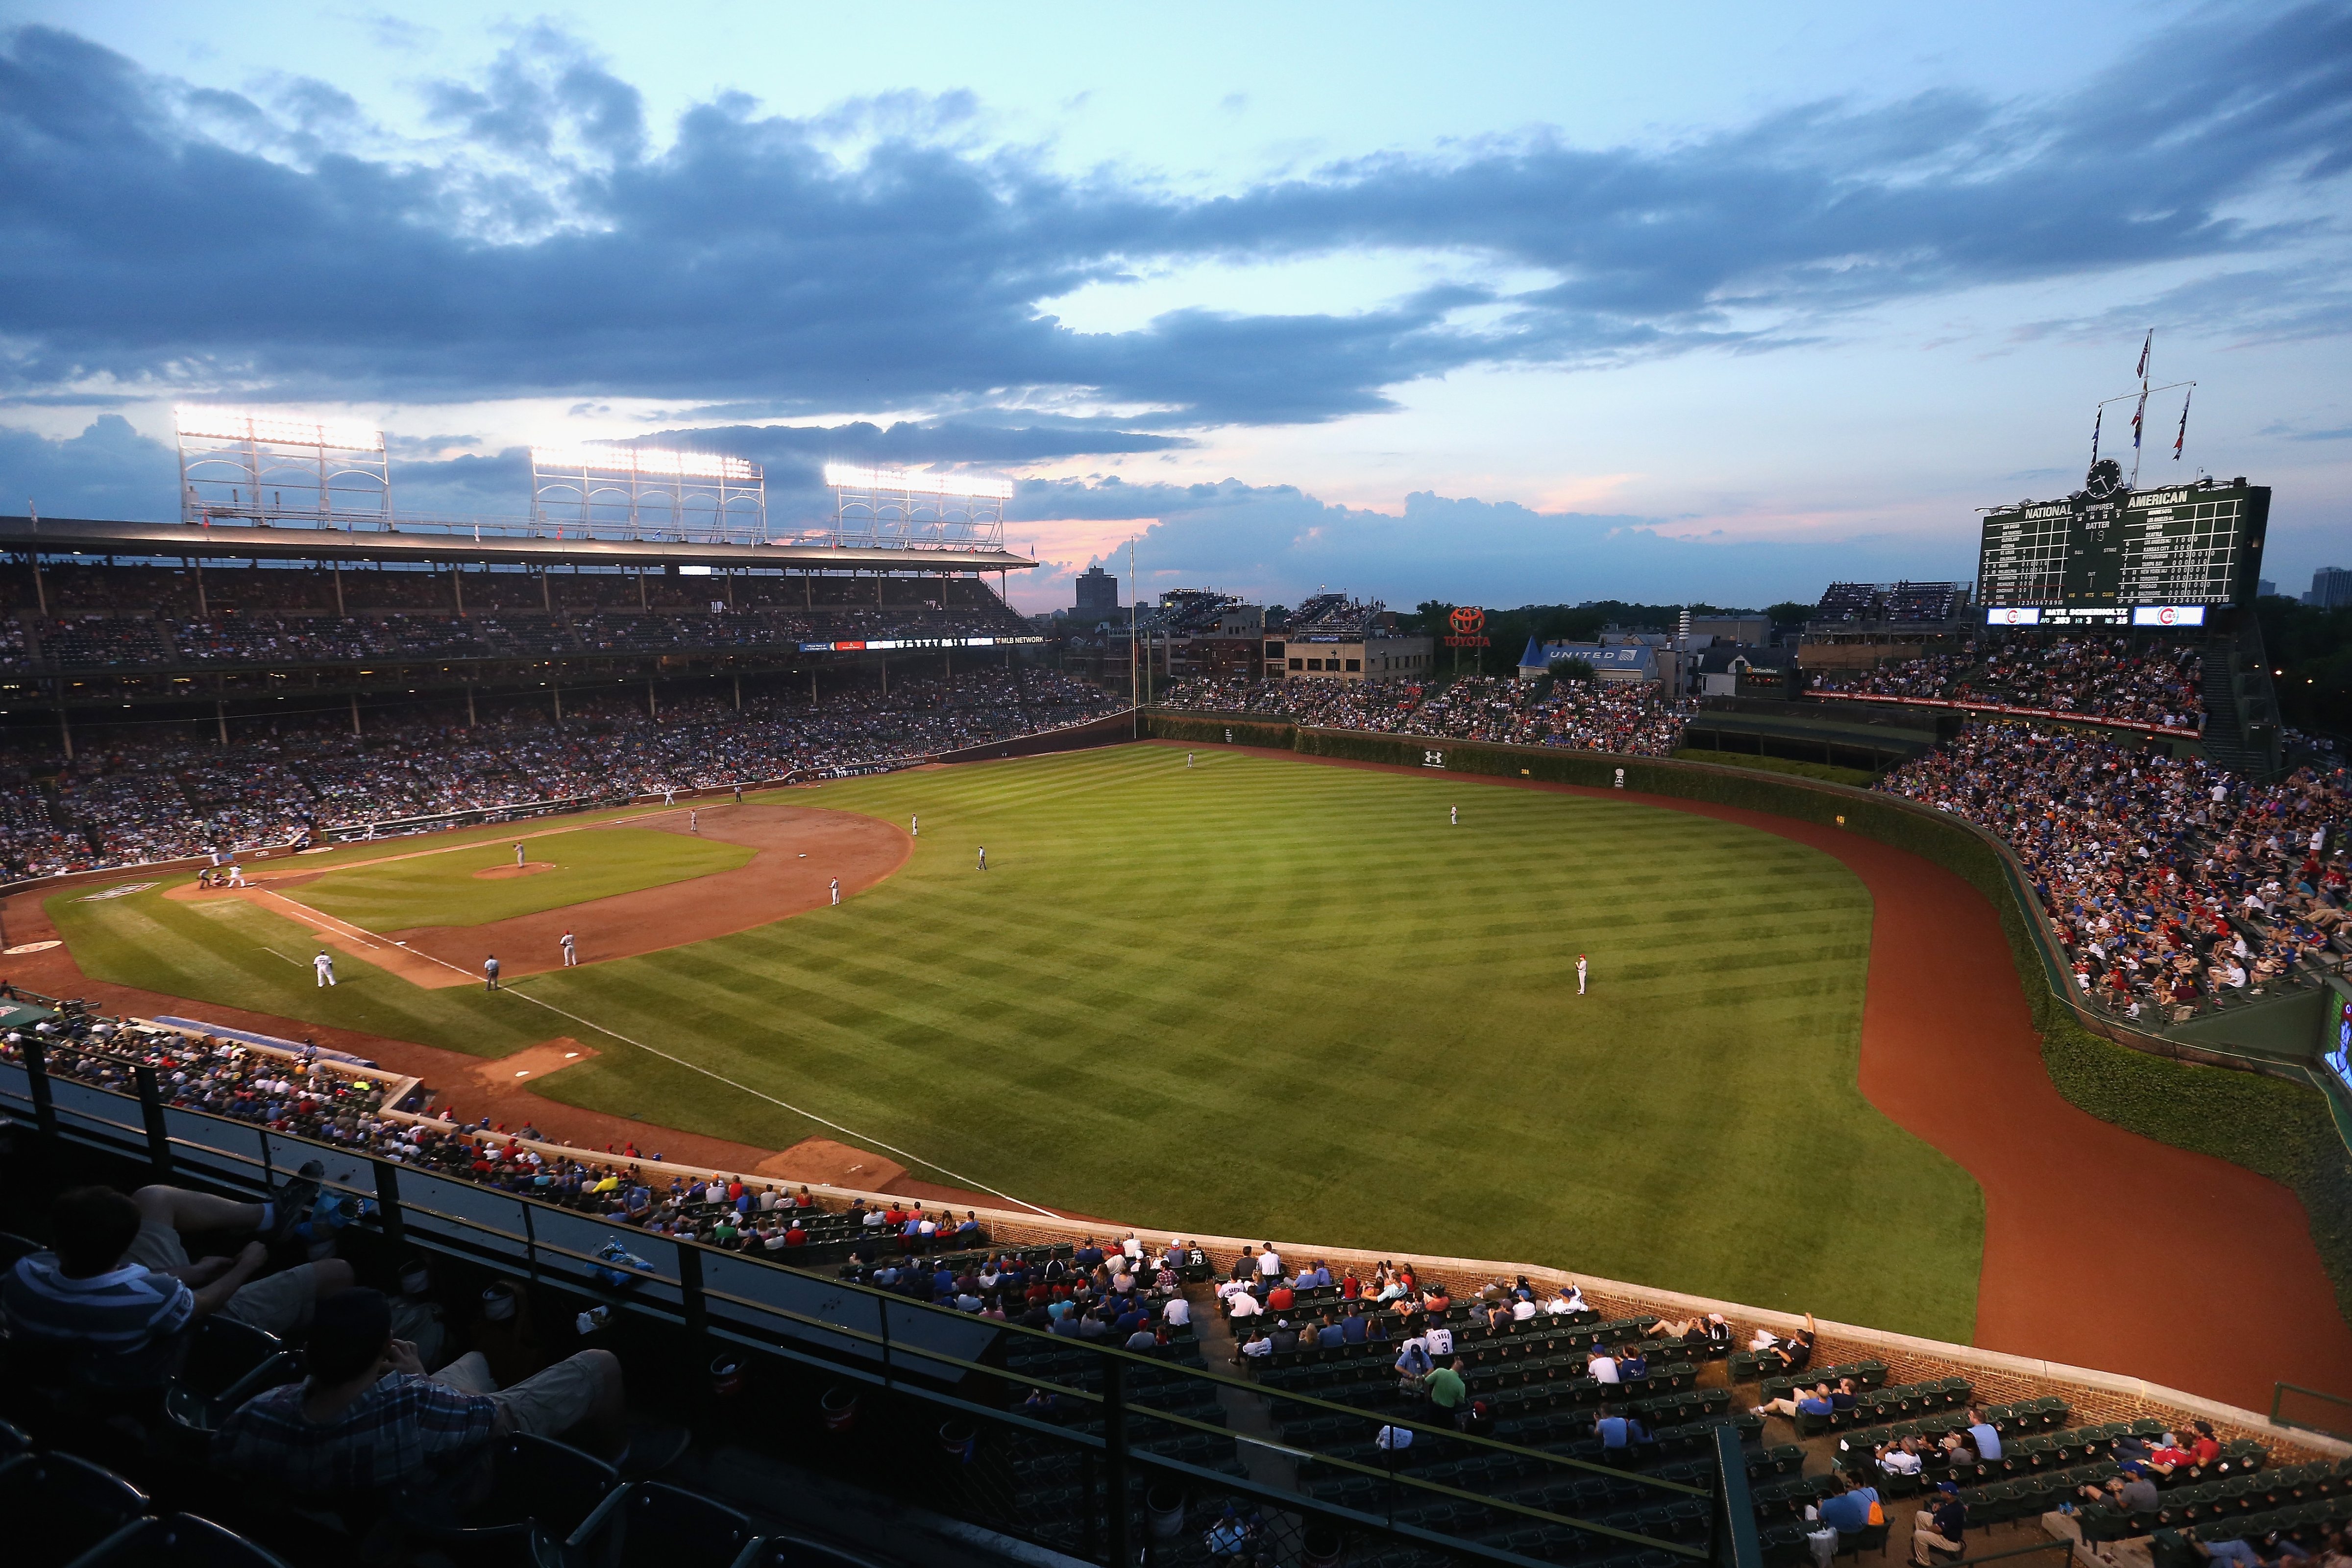 Wrigley Field Chicago Cubs